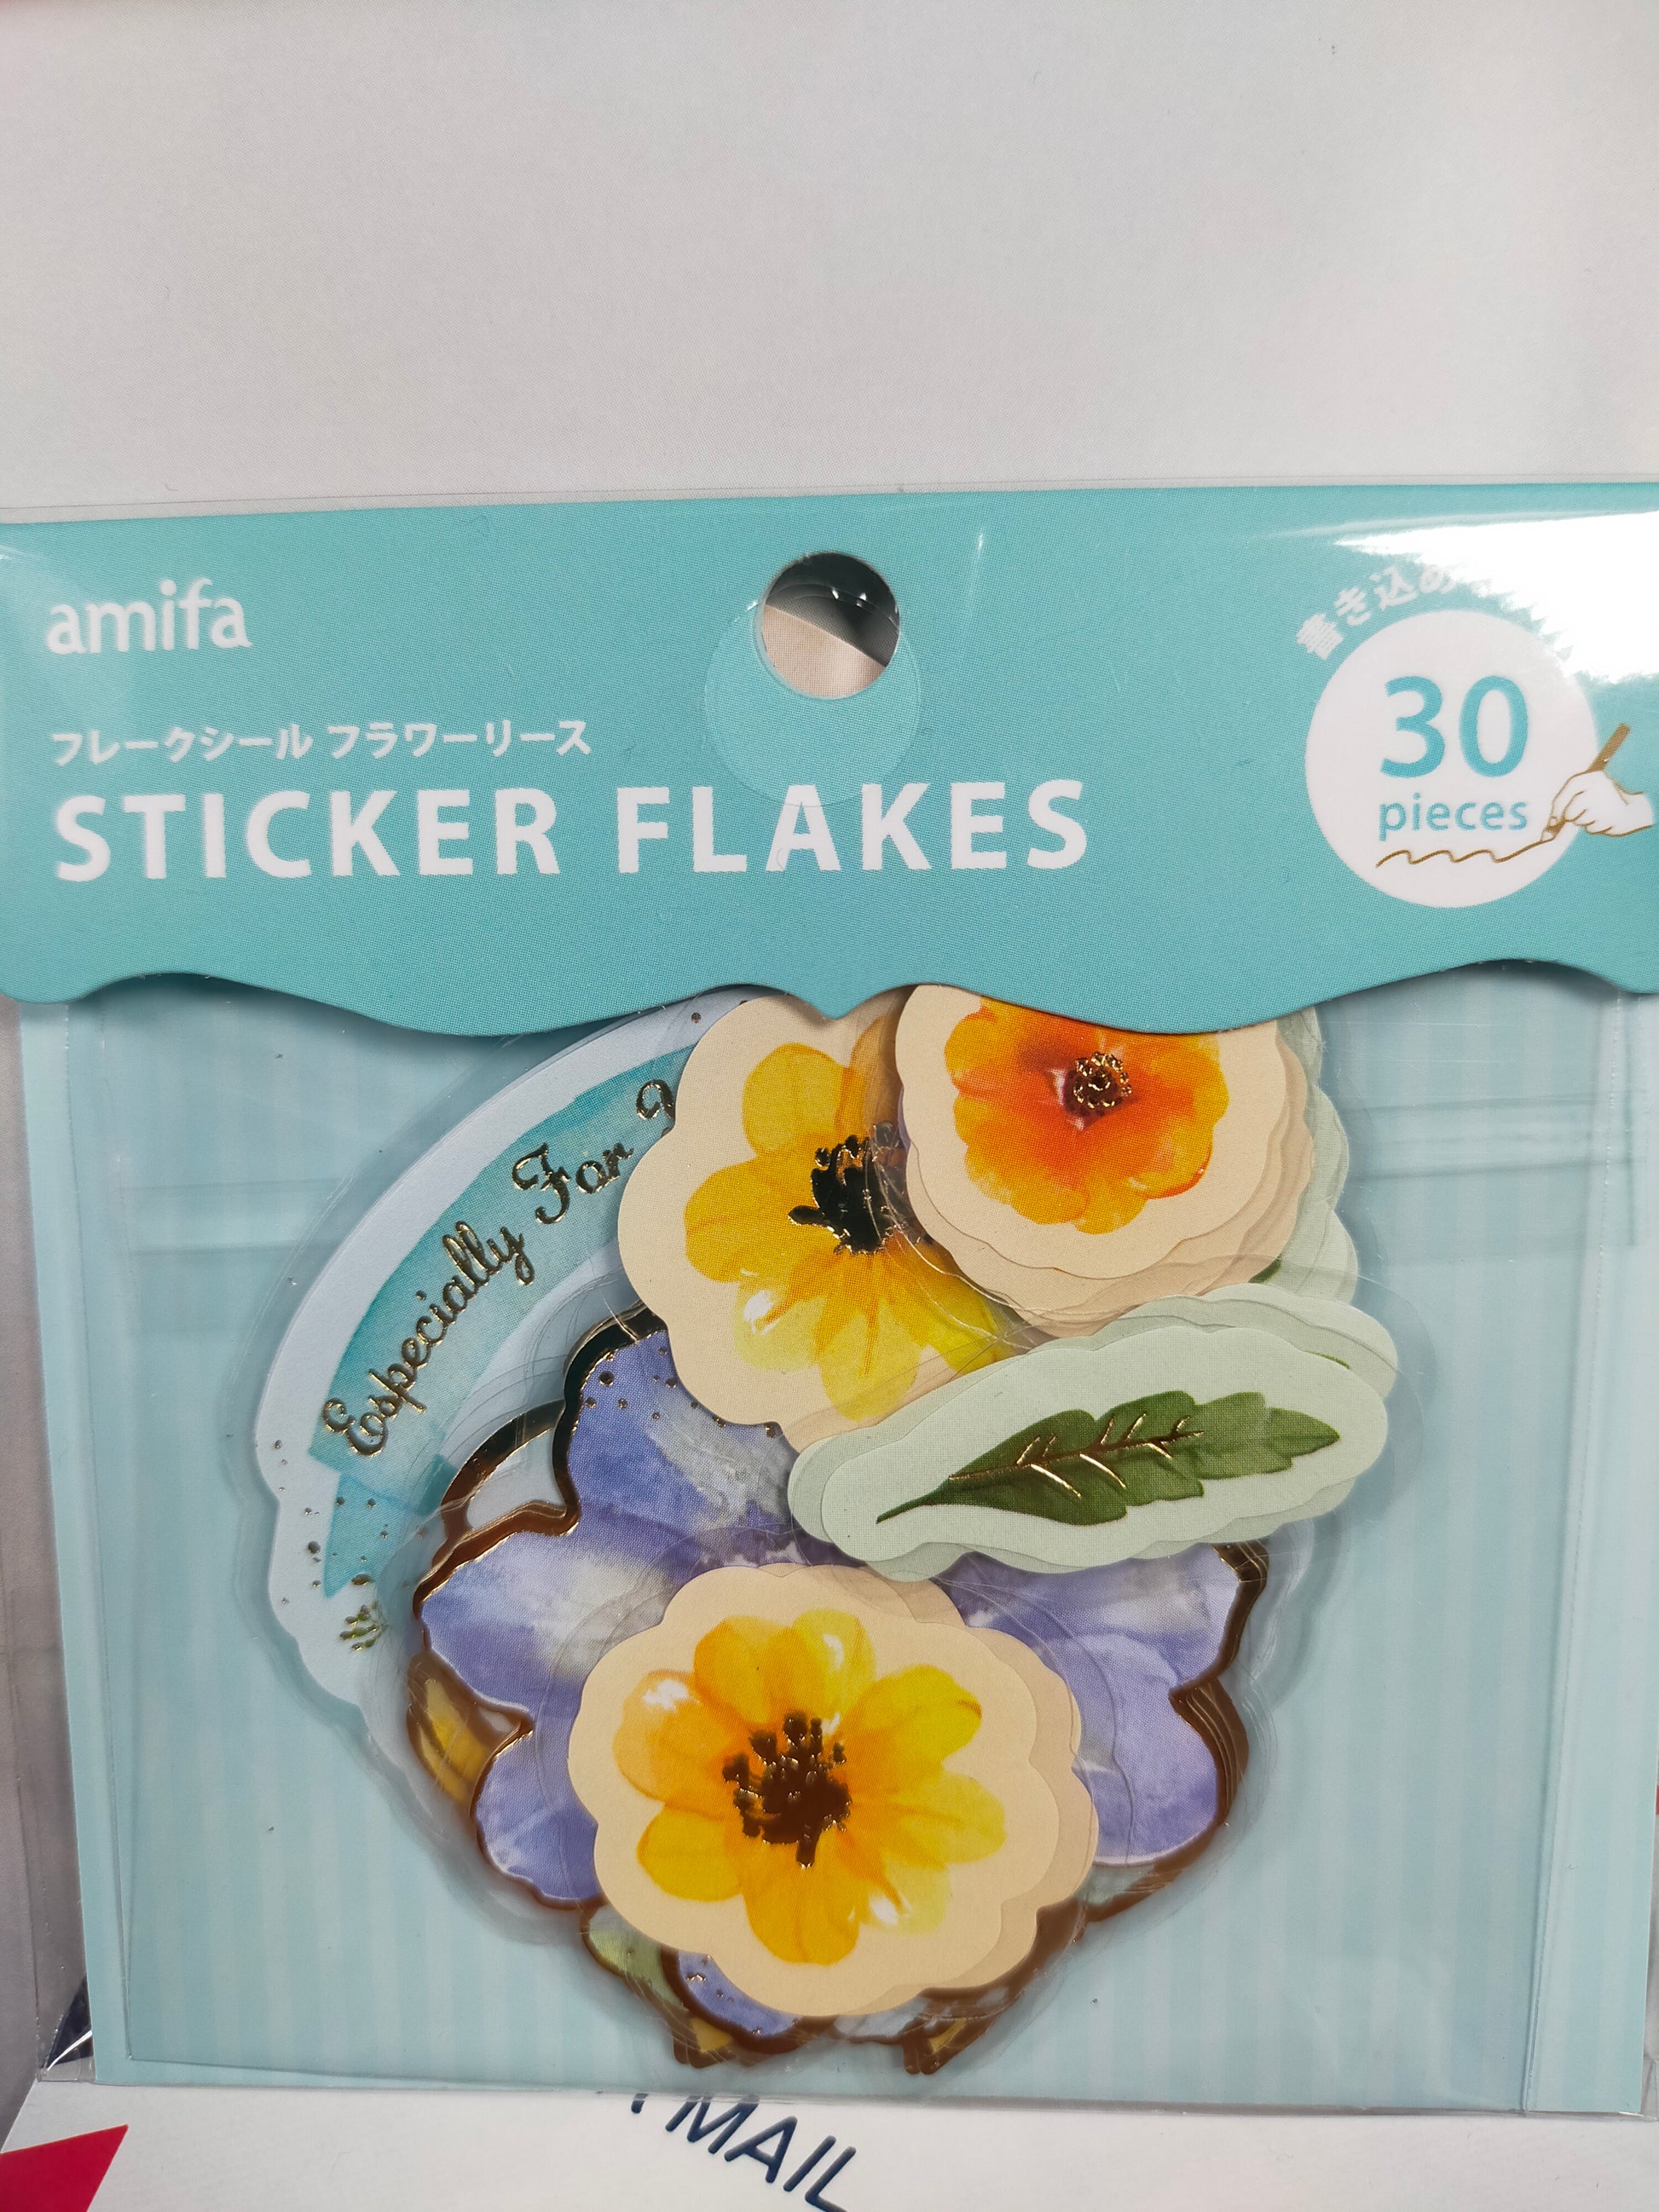 STICKER FLAKES Flower Wreath Foil Stamping 10designs*4pieces, amifa_ Pink / Light Blue